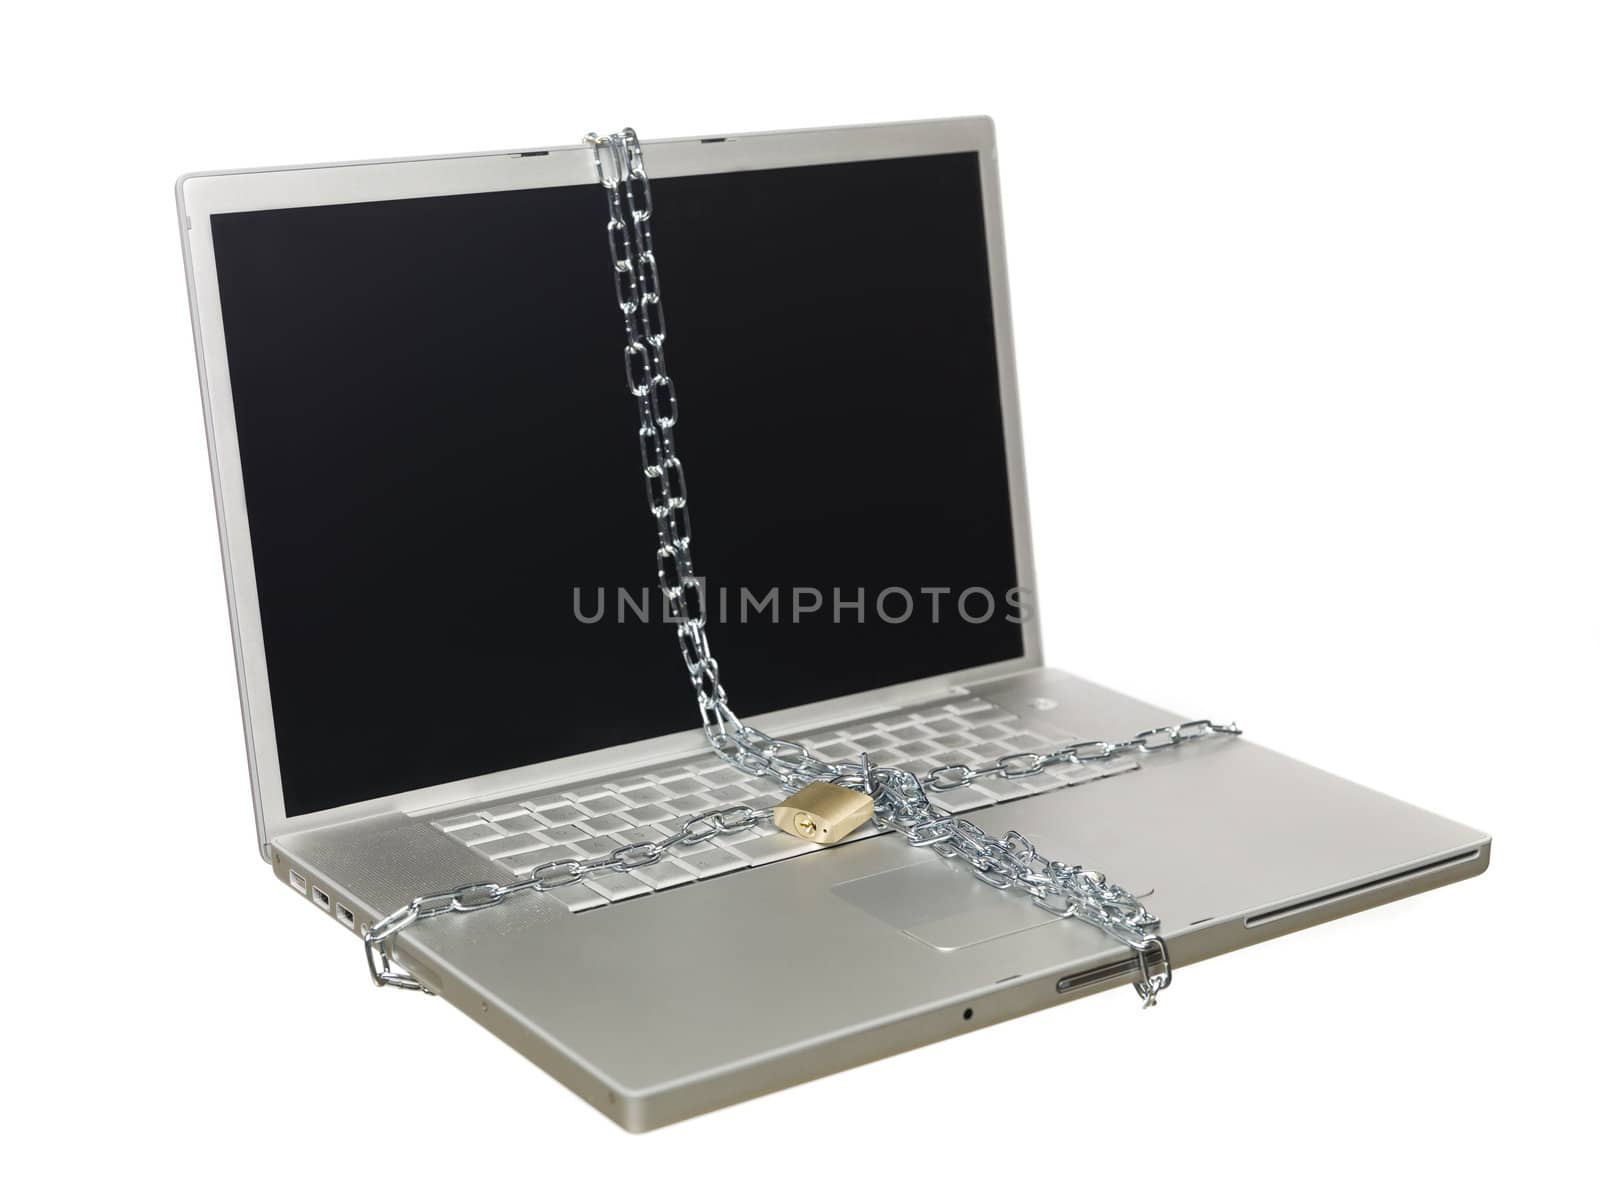 Chained and locked laptop by gemenacom